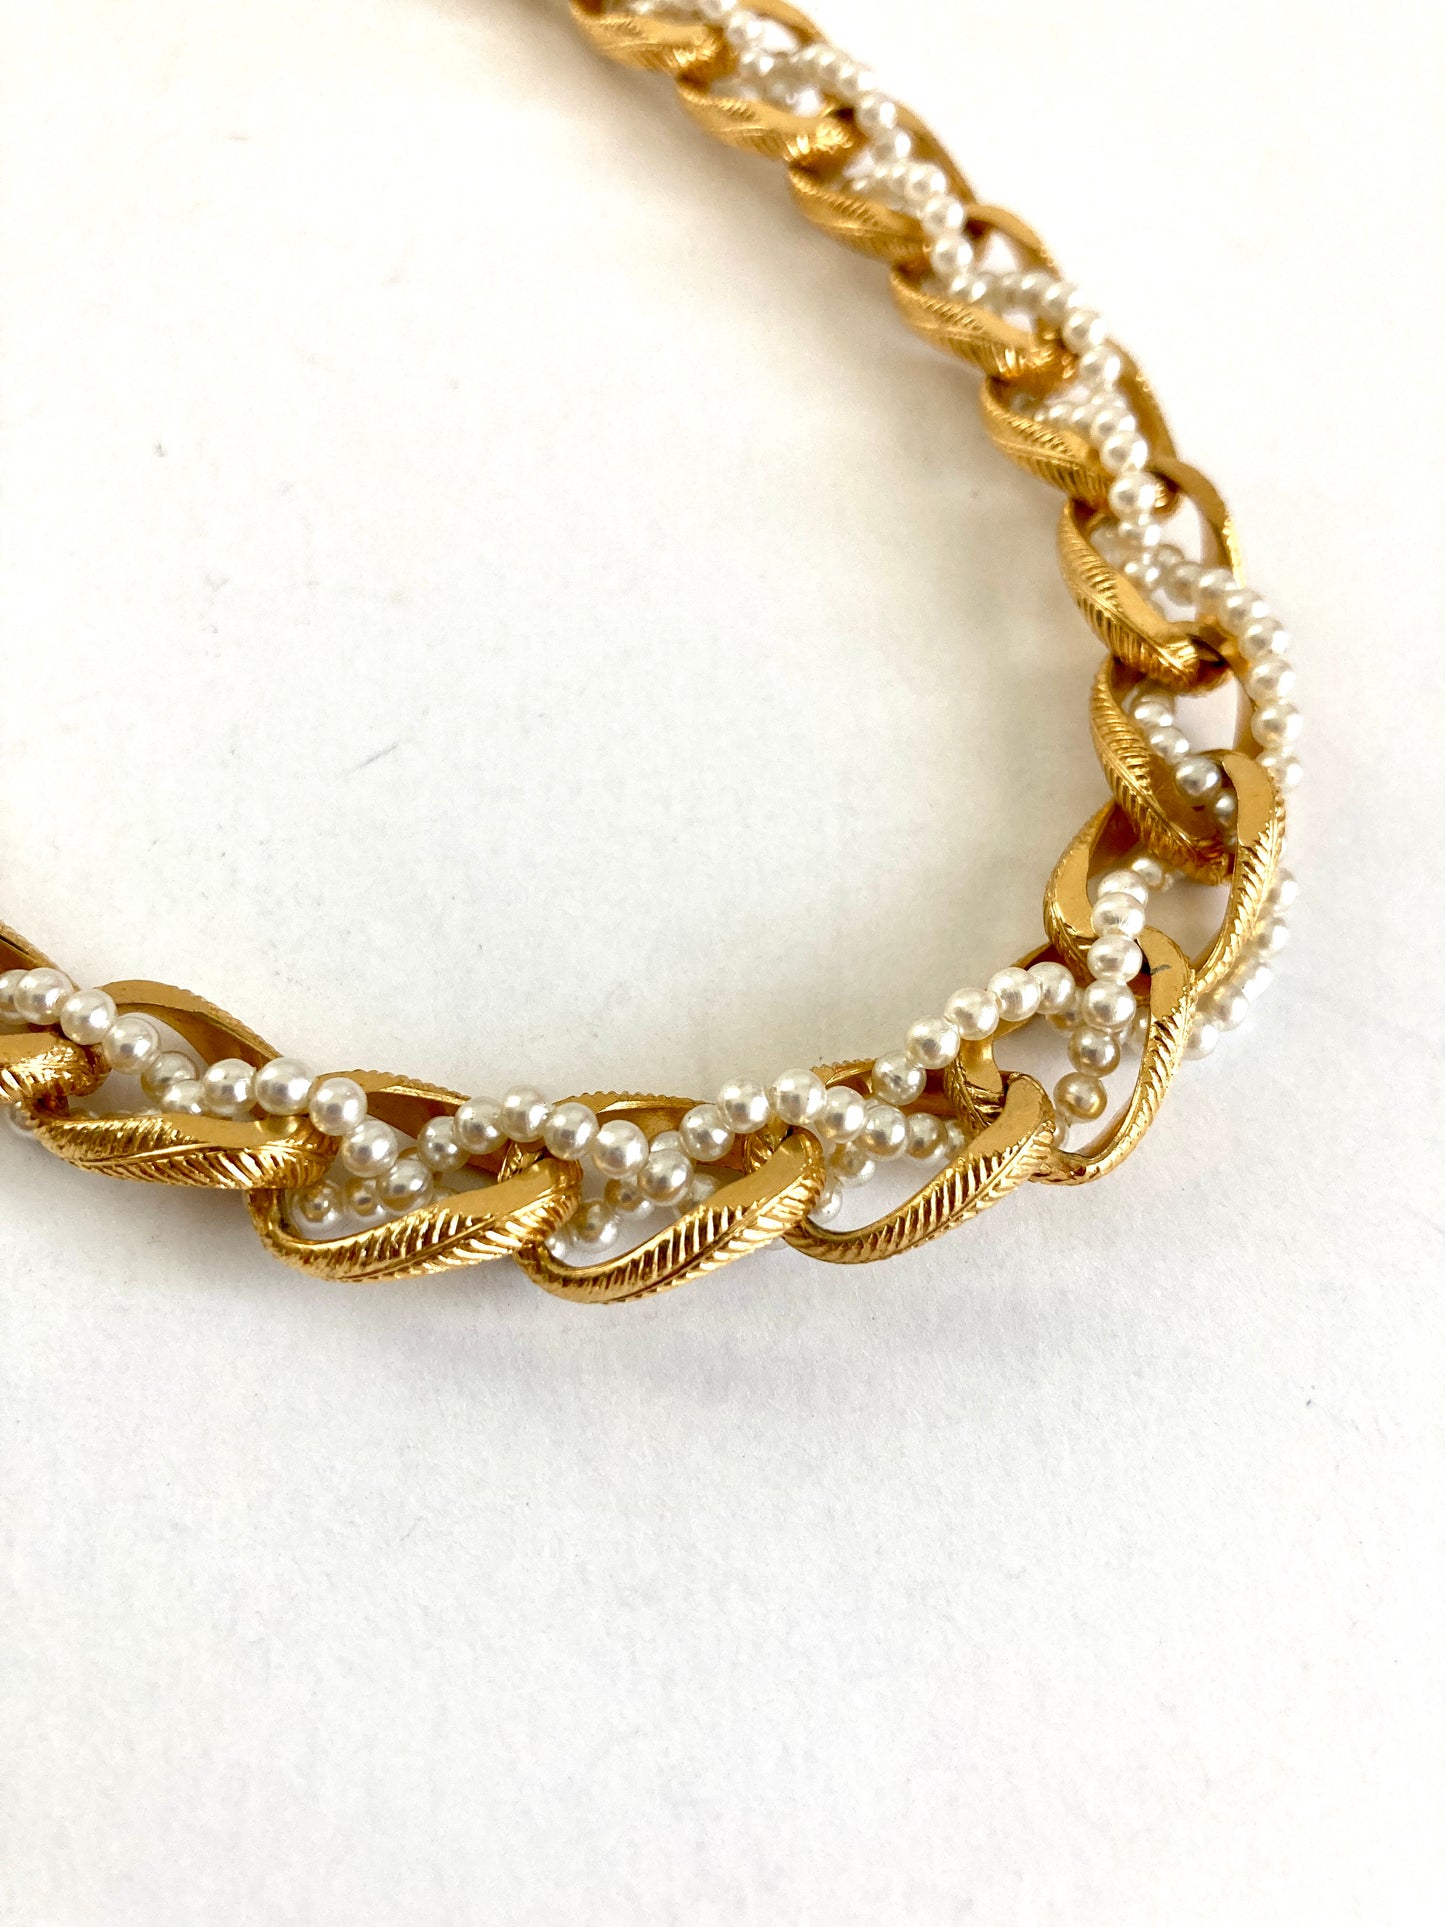 Gold Tone Textured Chain with Woven Pearl Necklace